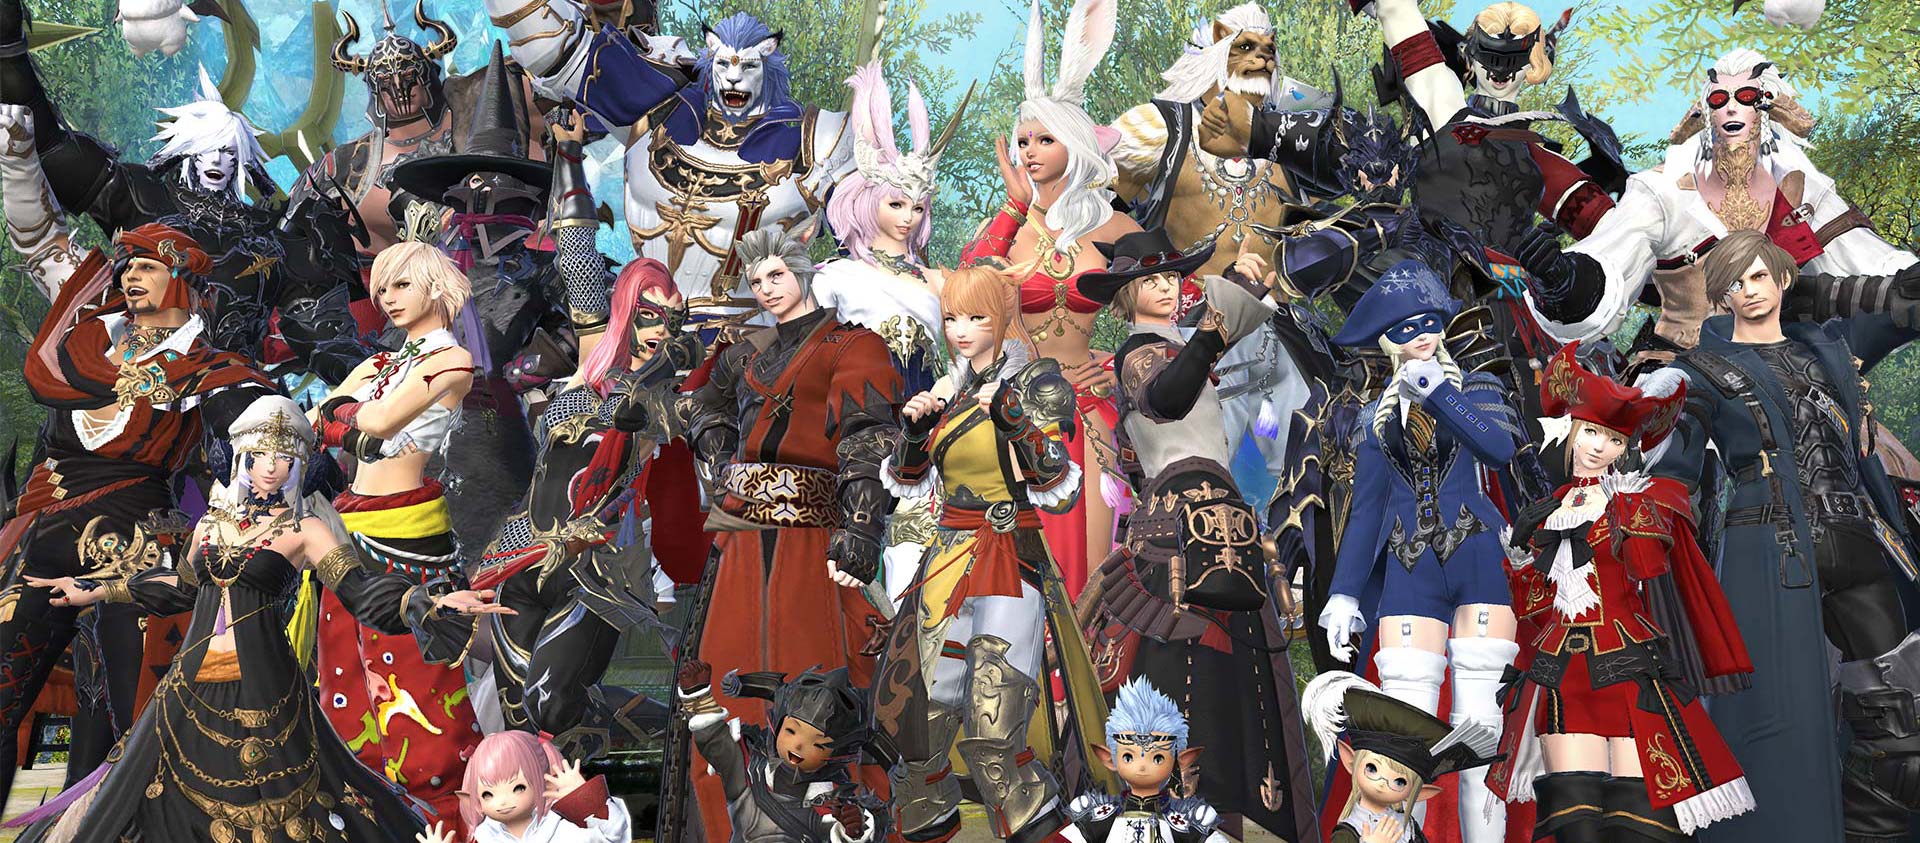 A group of customised characters posing together with joy on their faces.